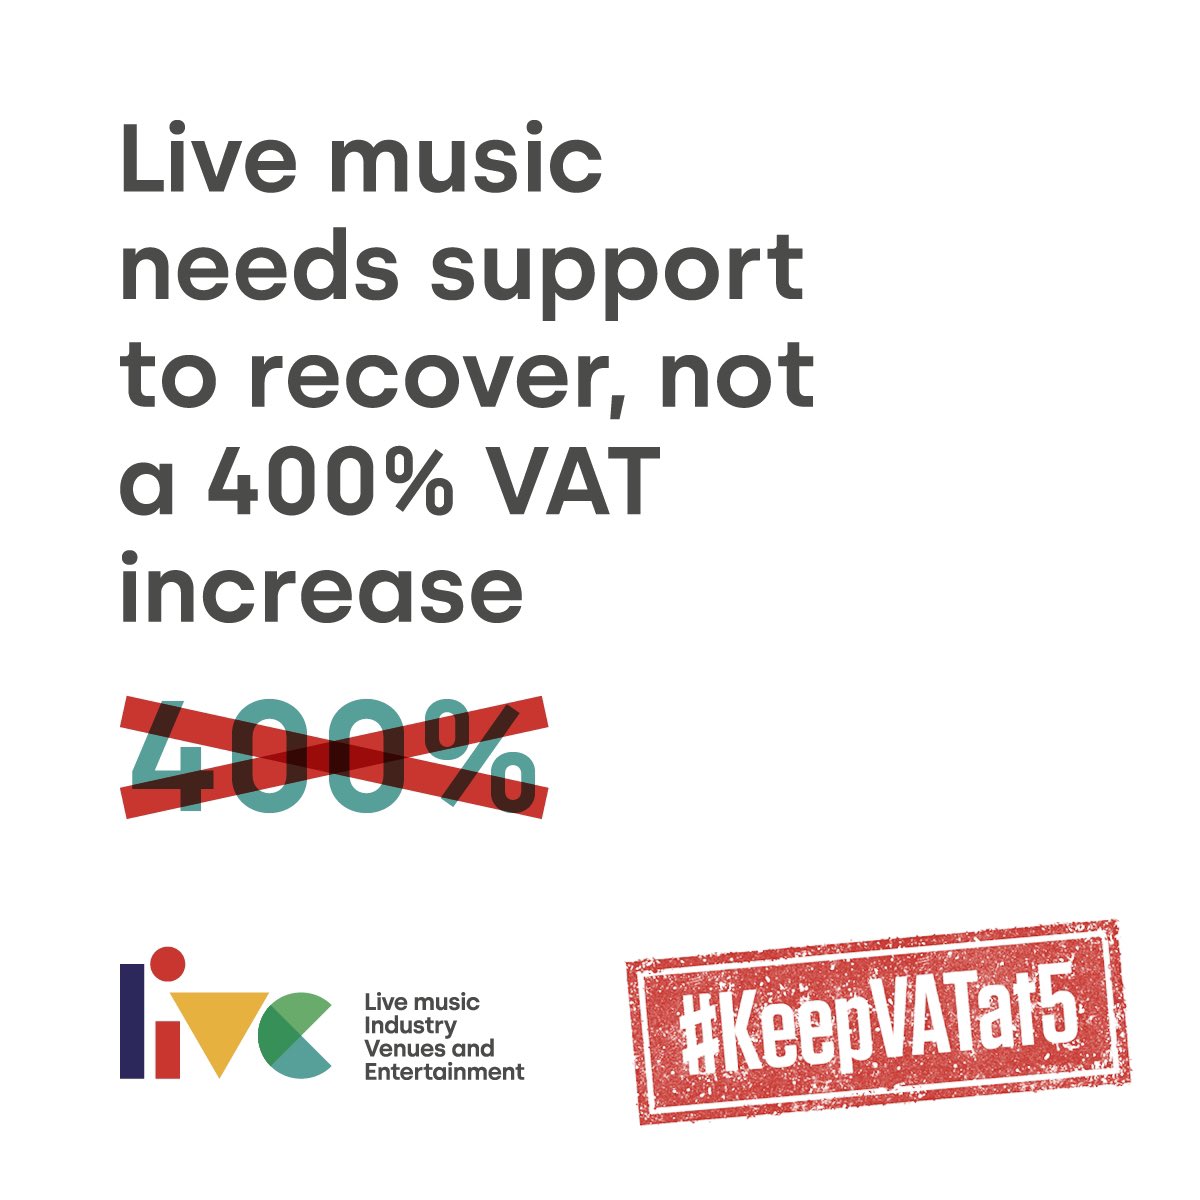 Think about the last time you went to a gig😢
It takes lots of people to make that happen
These people & the live industry need support

The Government temporarily cut VAT on tickets to 5%

That's due to end 31/3/21

It needs to stay at 5% so live music can recover

#KeepVATat5